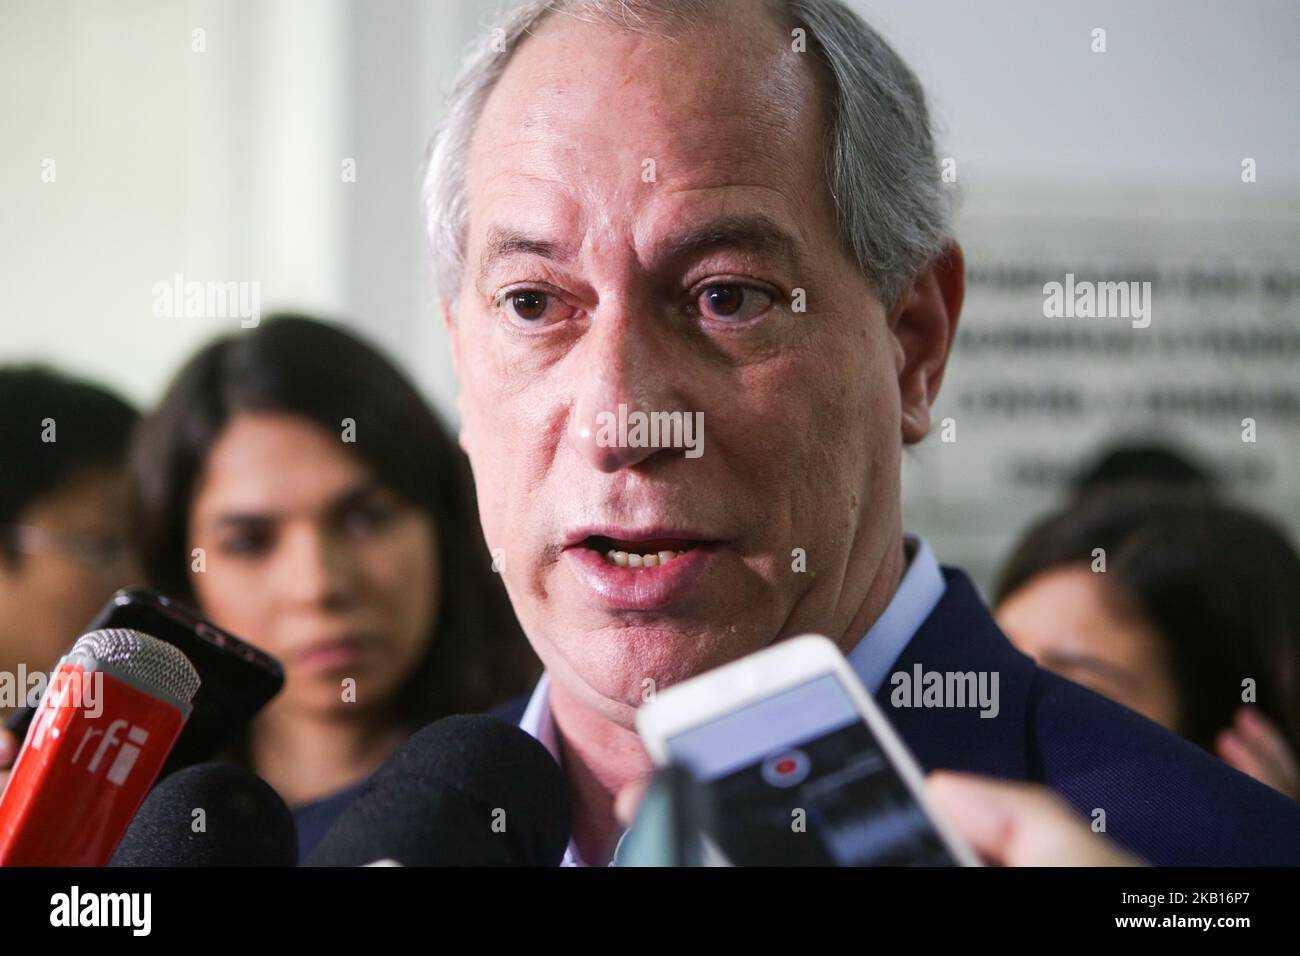 The candidate for the Presidency of the Republic, Ciro Gomes, was at the headquarters of the Brazilian Society for the Advancement of Science (SBPC) in Sao Paulo on September 18, 2018. He answered questions from the scientific community about the plans for ST & I, if elected. (Photo by Dario Oliveira/NurPhoto) Stock Photo